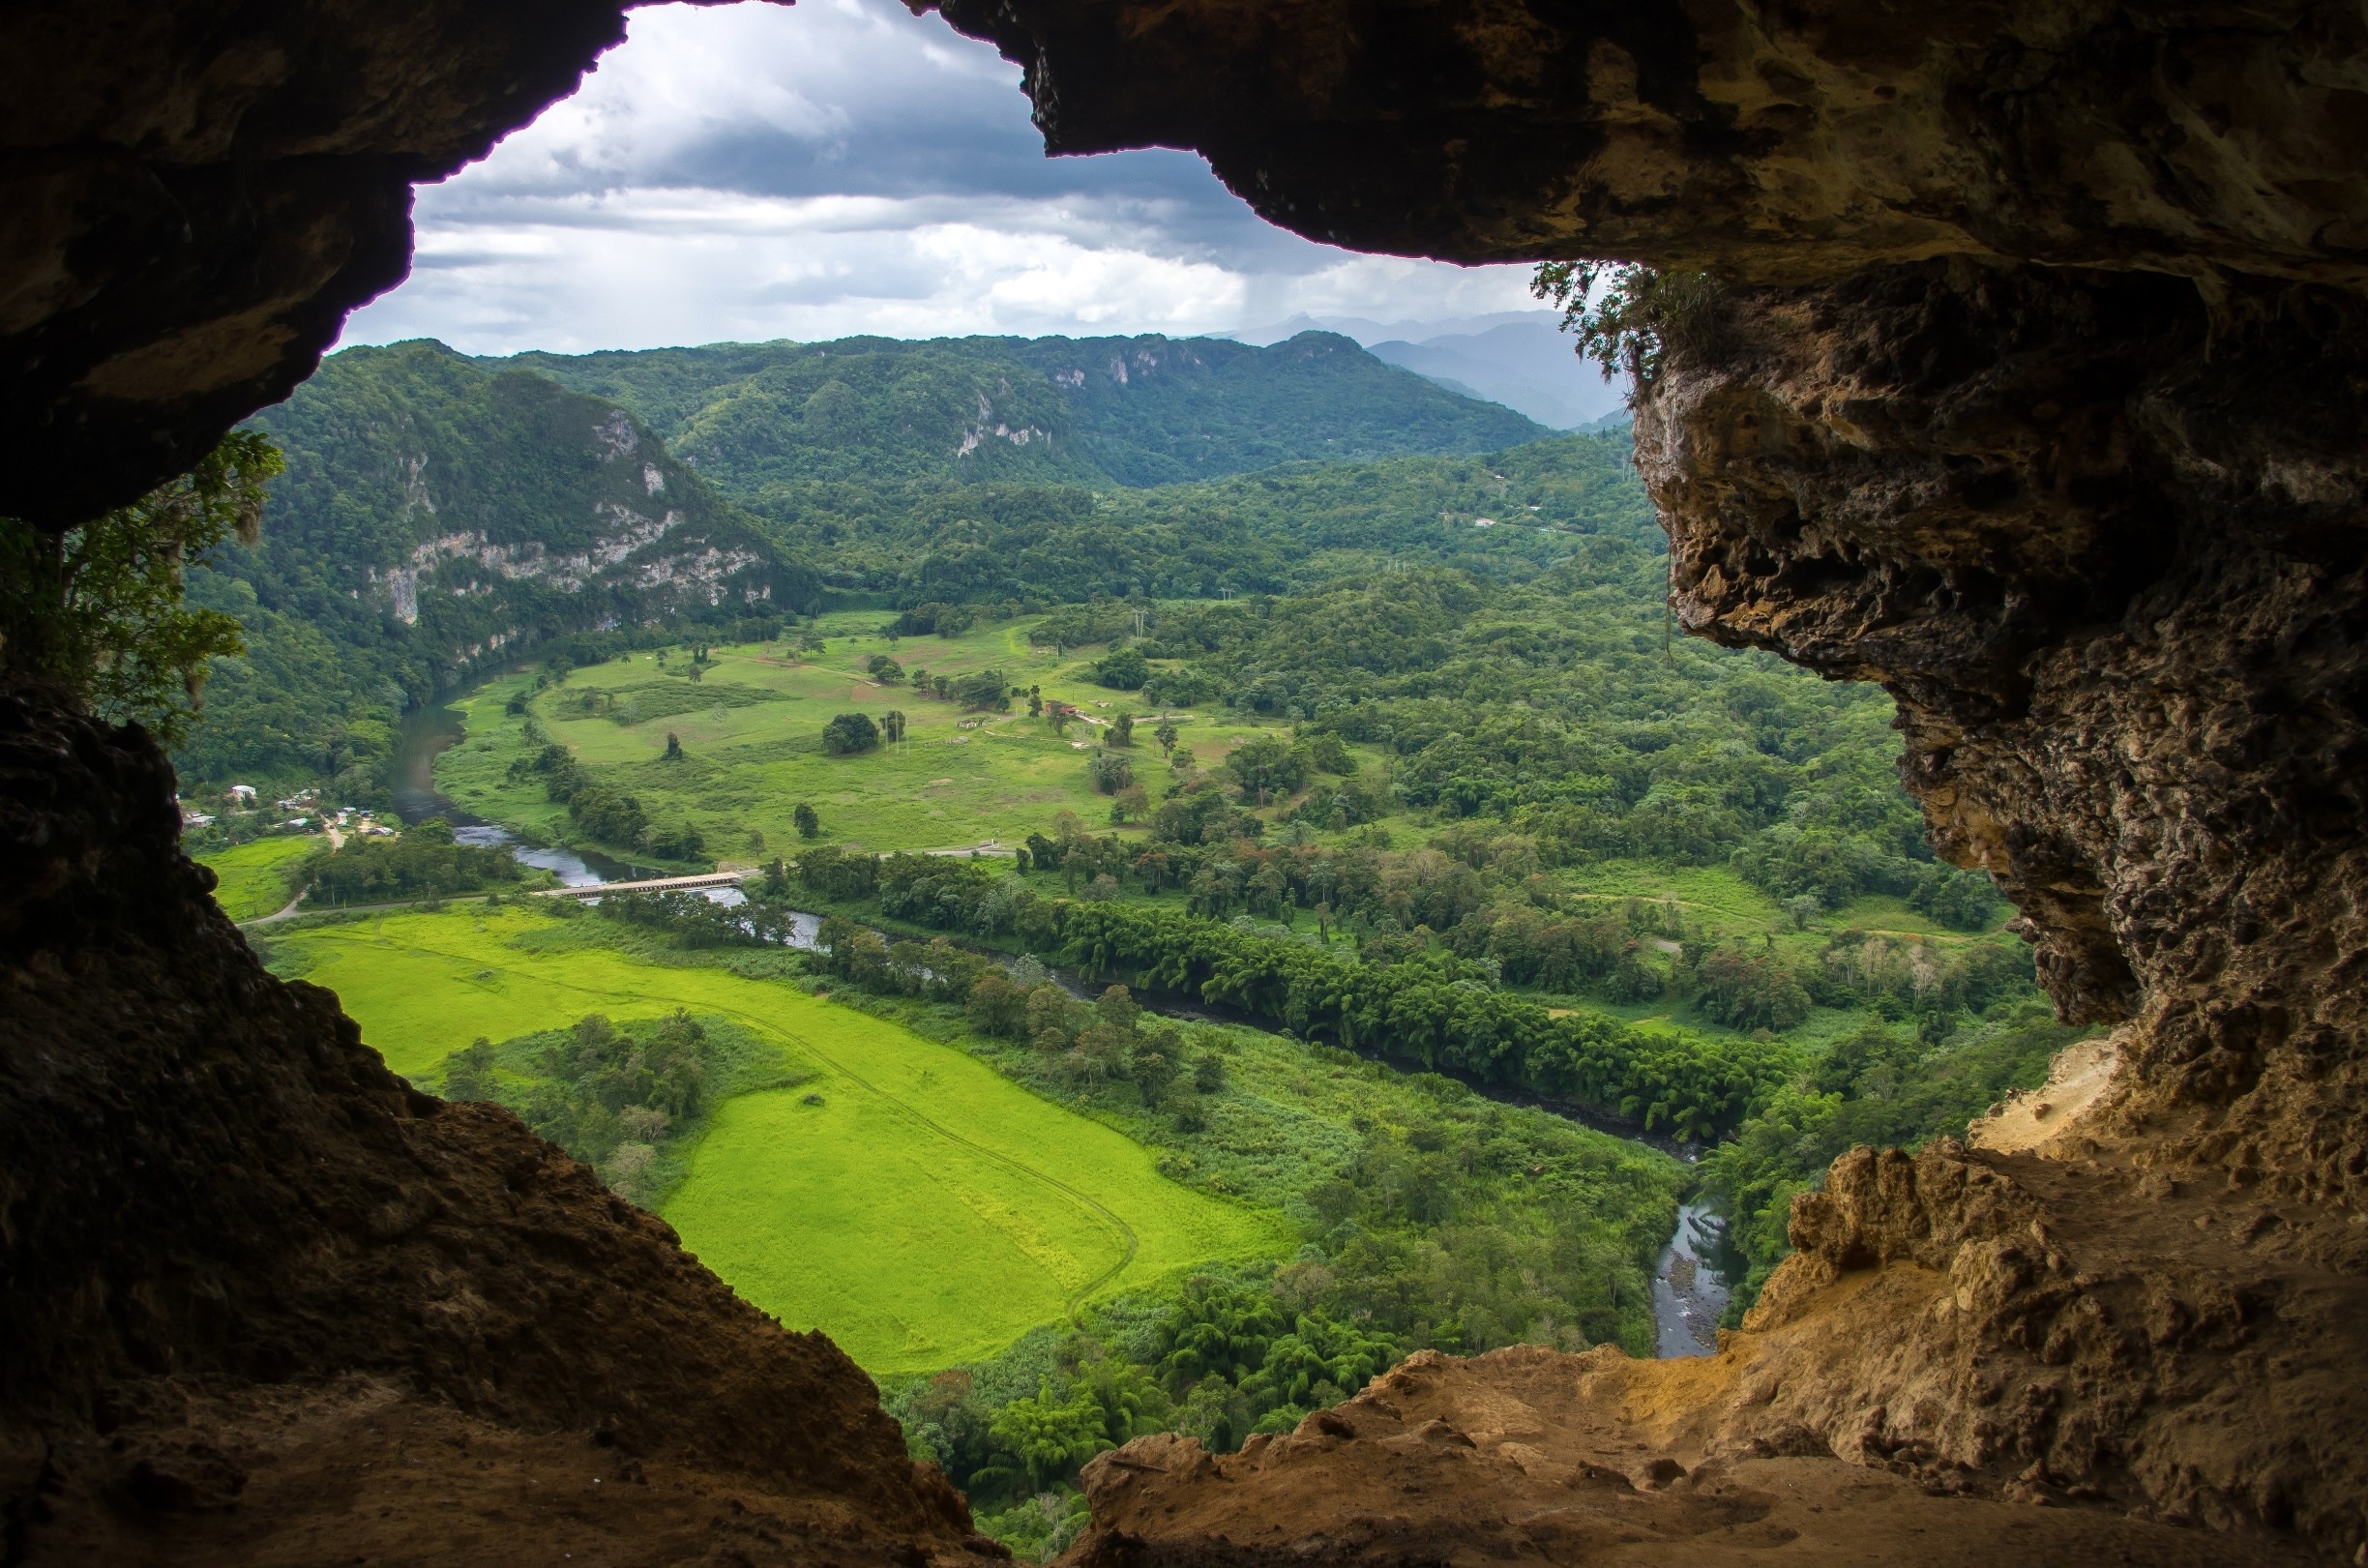 An easy guided hike through interesting cave formations leads to to this magnificent valley view. Don't look up… there are bats!  #bestof5 #green